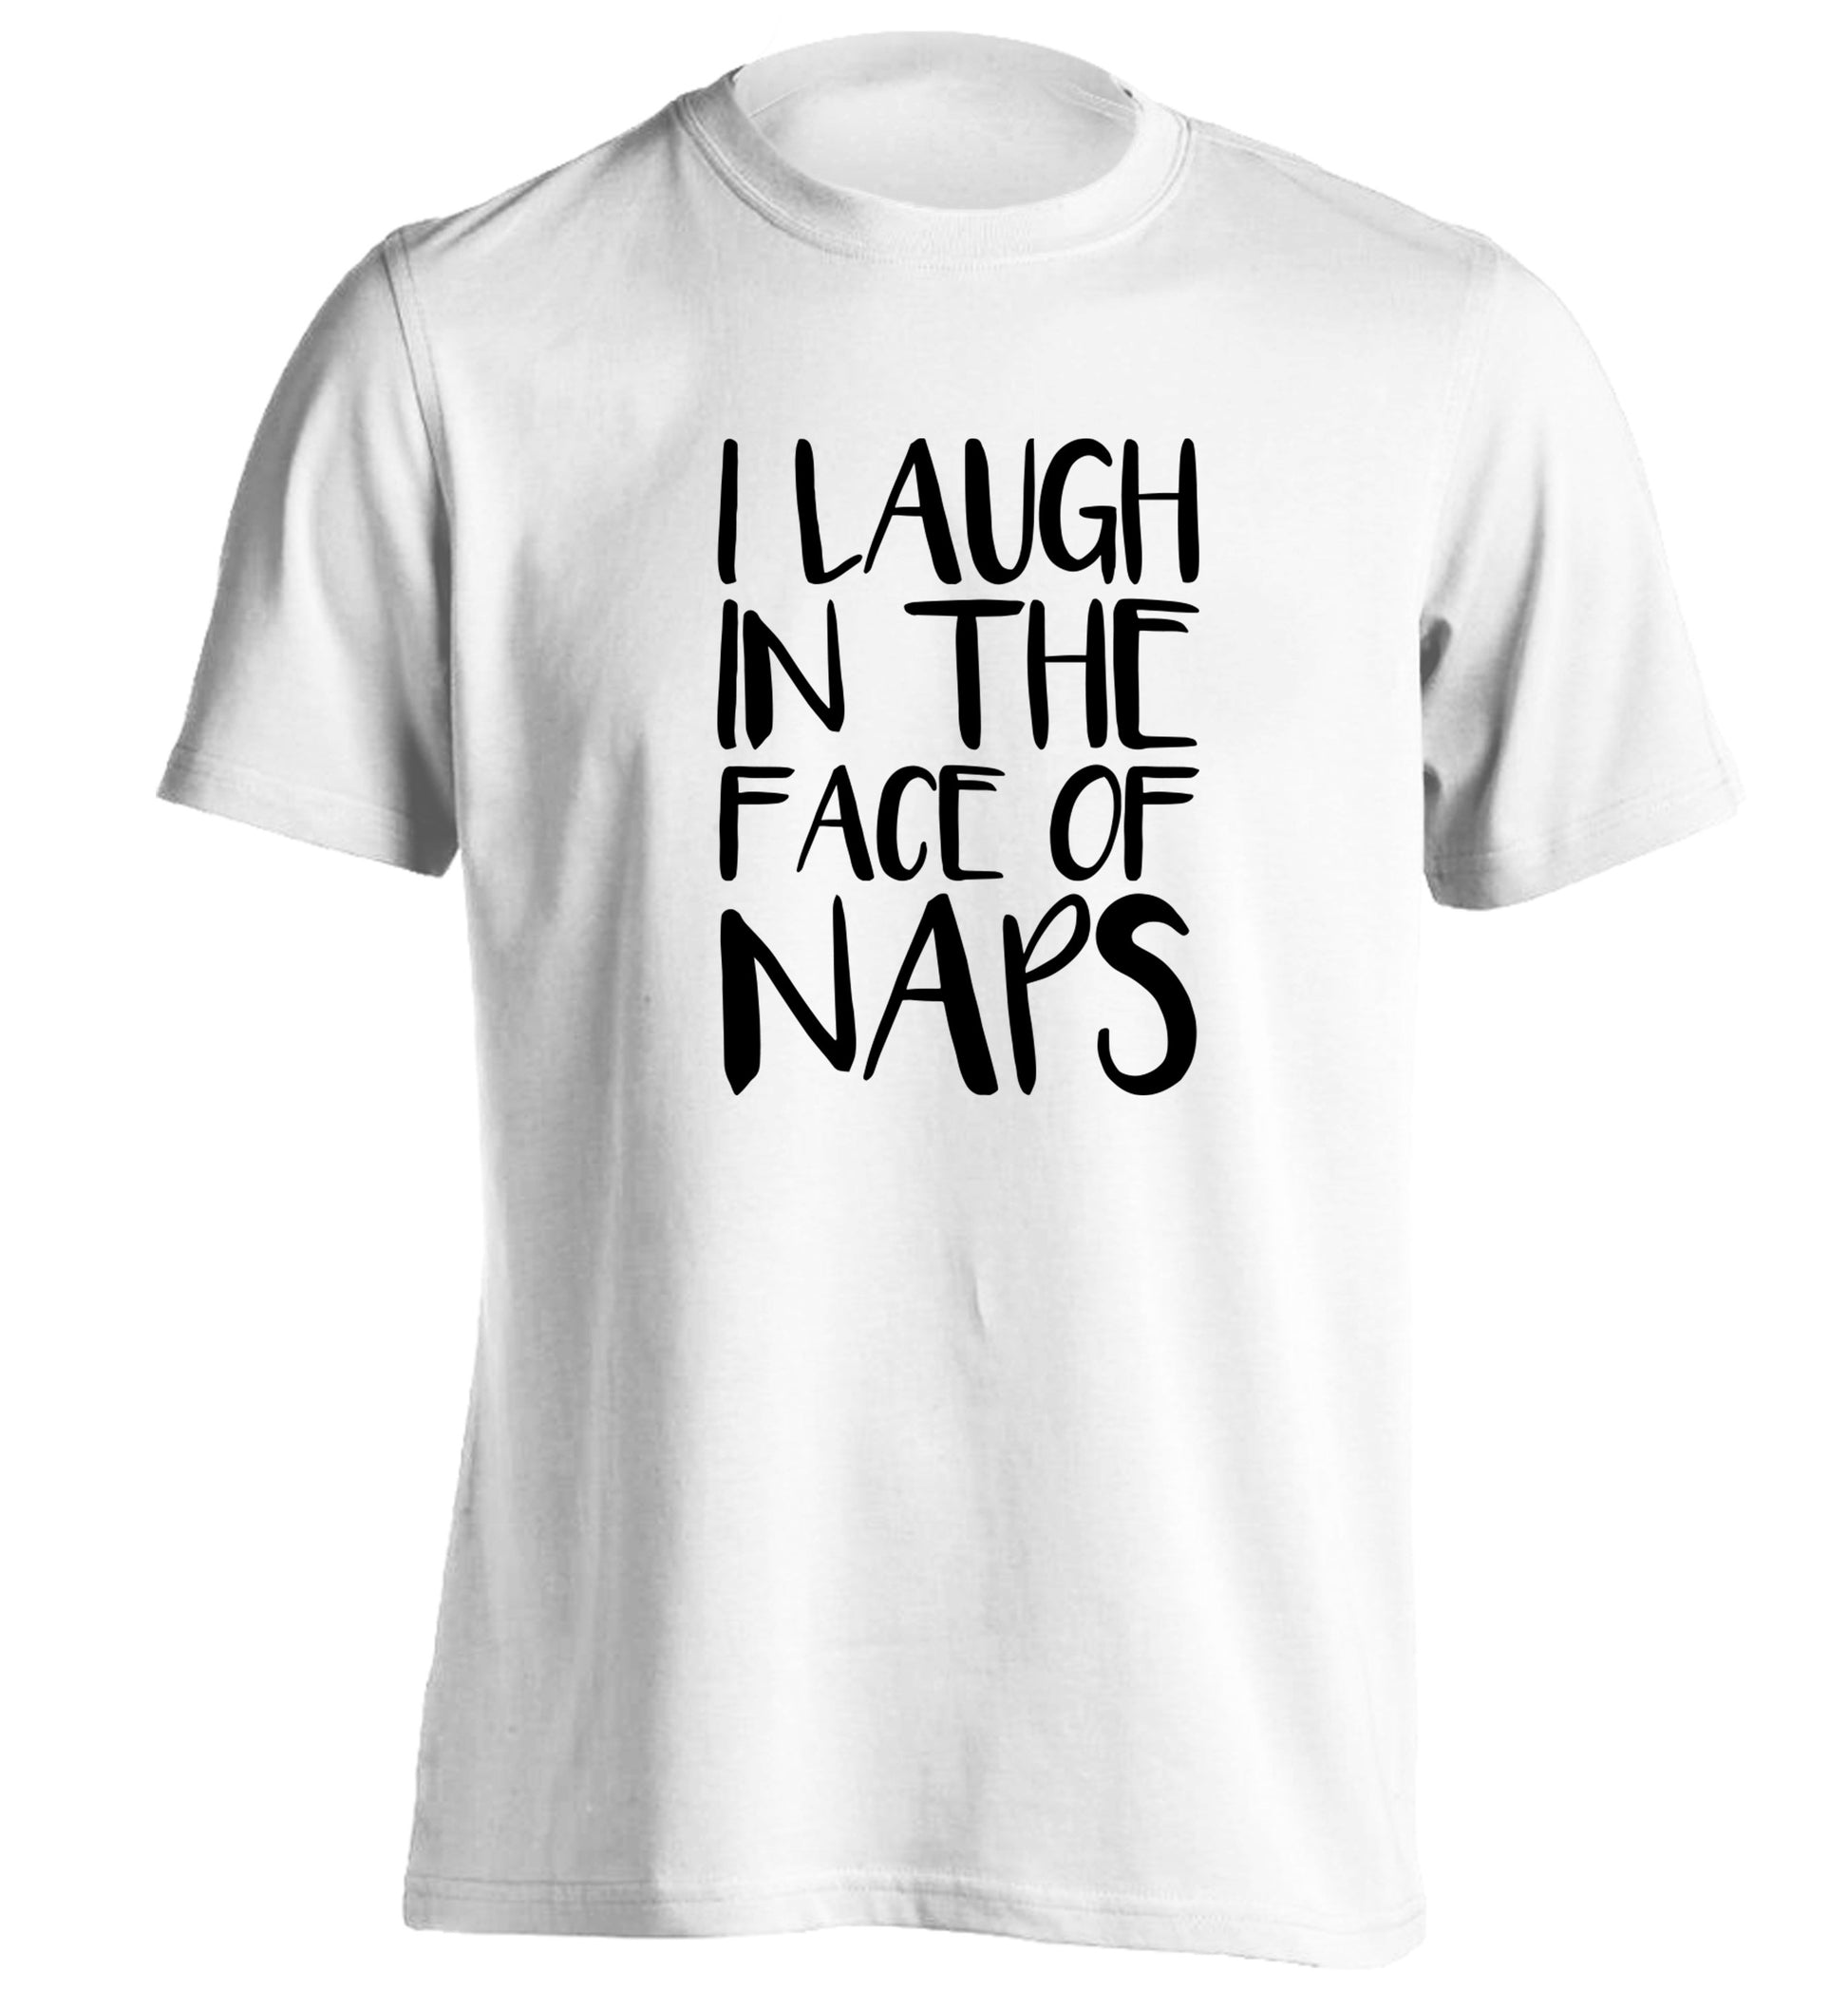 I laugh in the face of naps adults unisex white Tshirt 2XL